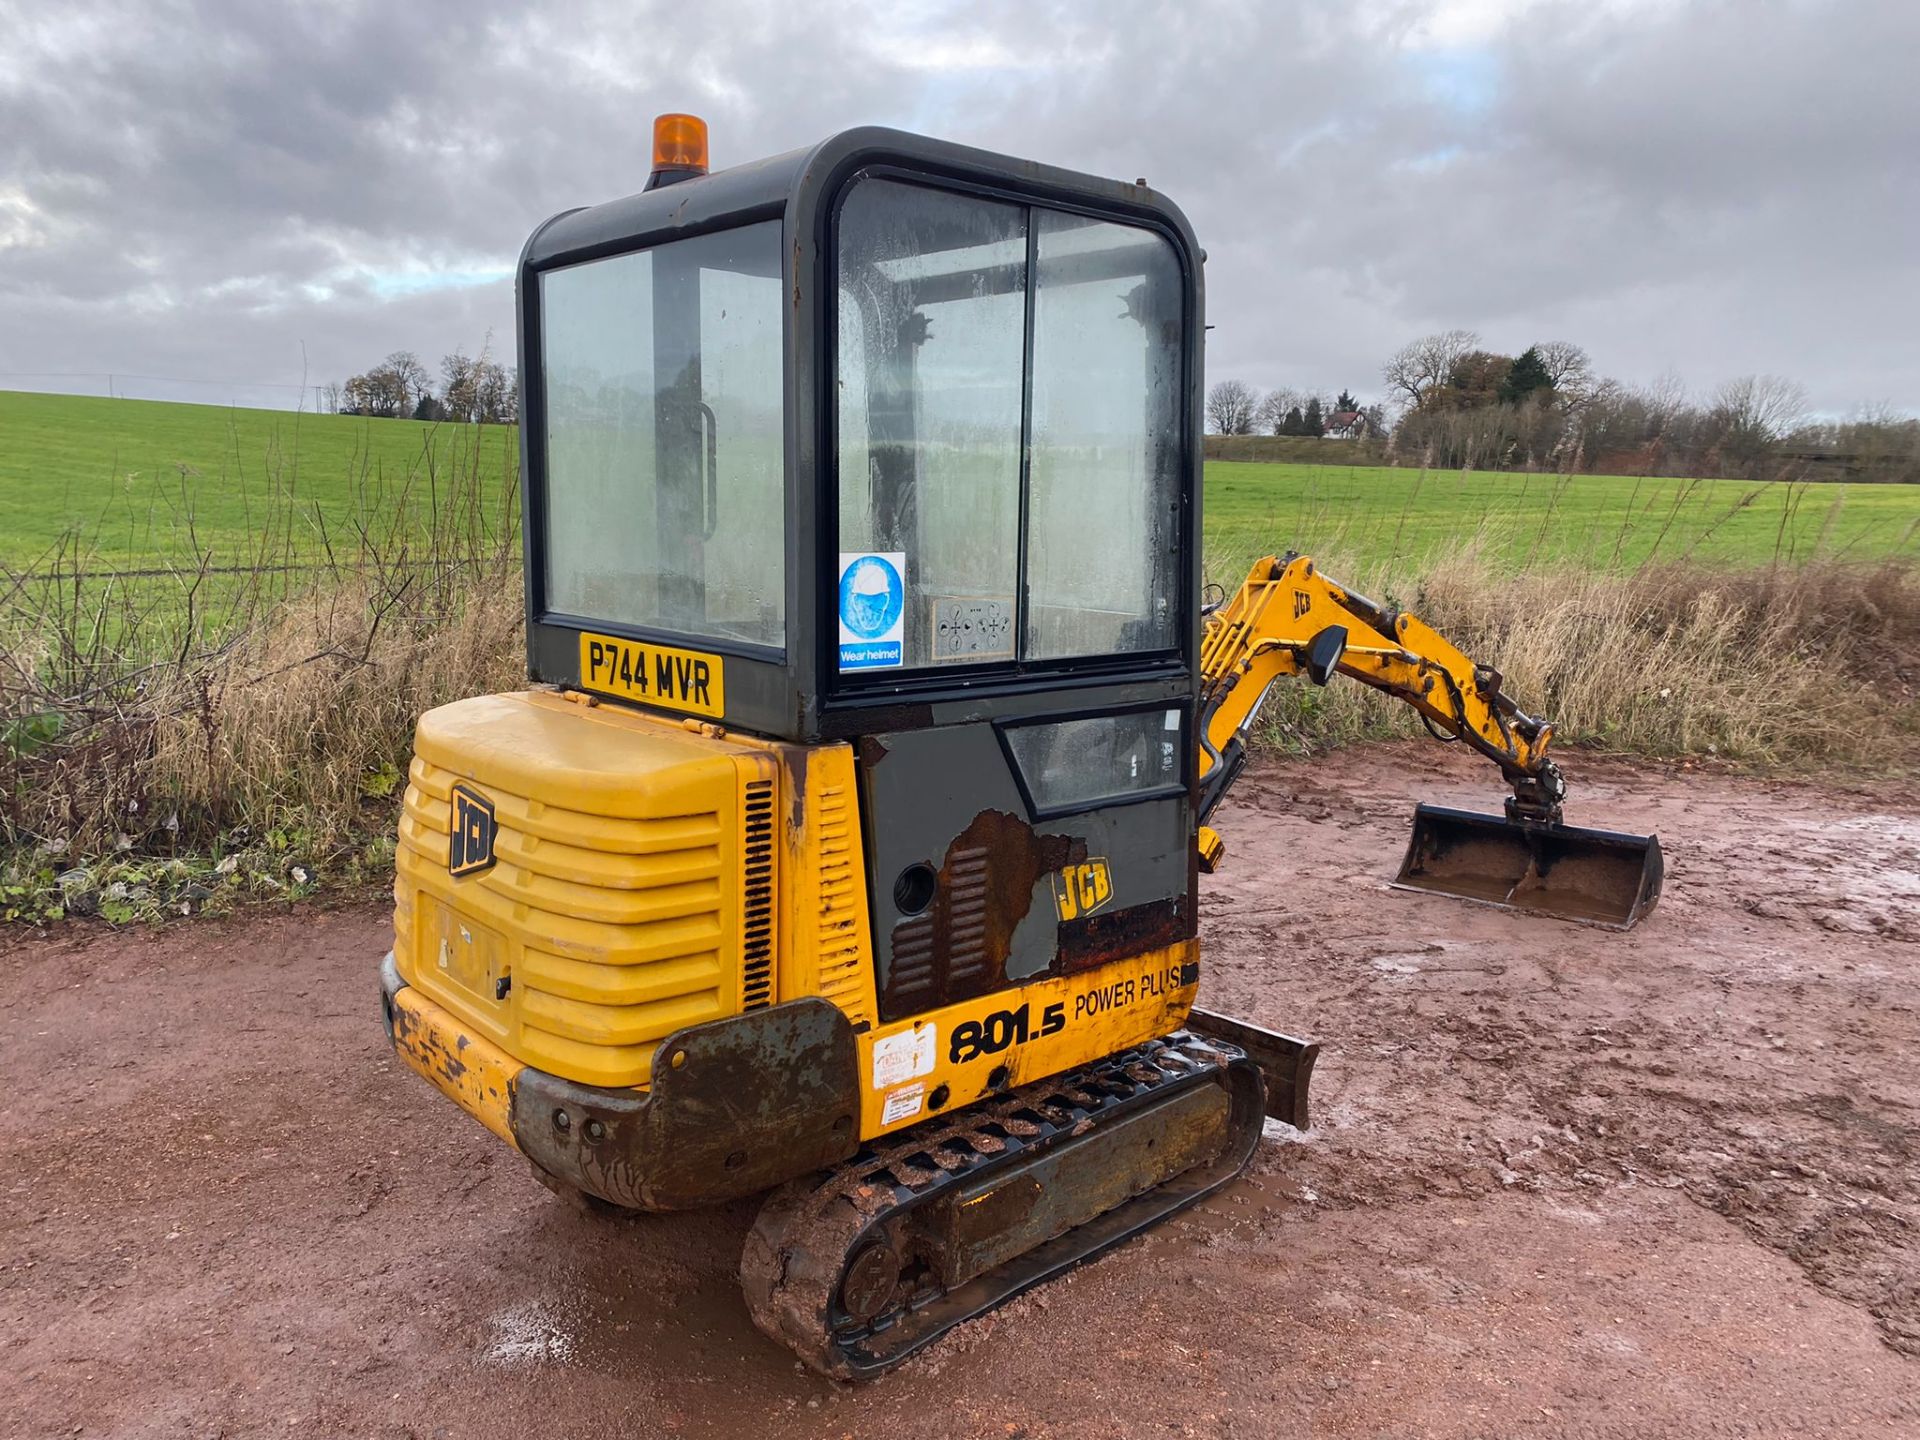 1997 JCB 801.5 POWER PLUS RUBBER TRACKED EXCAVATOR / DIGGER (P744 MVR) *PLUS VAT* - Image 6 of 18